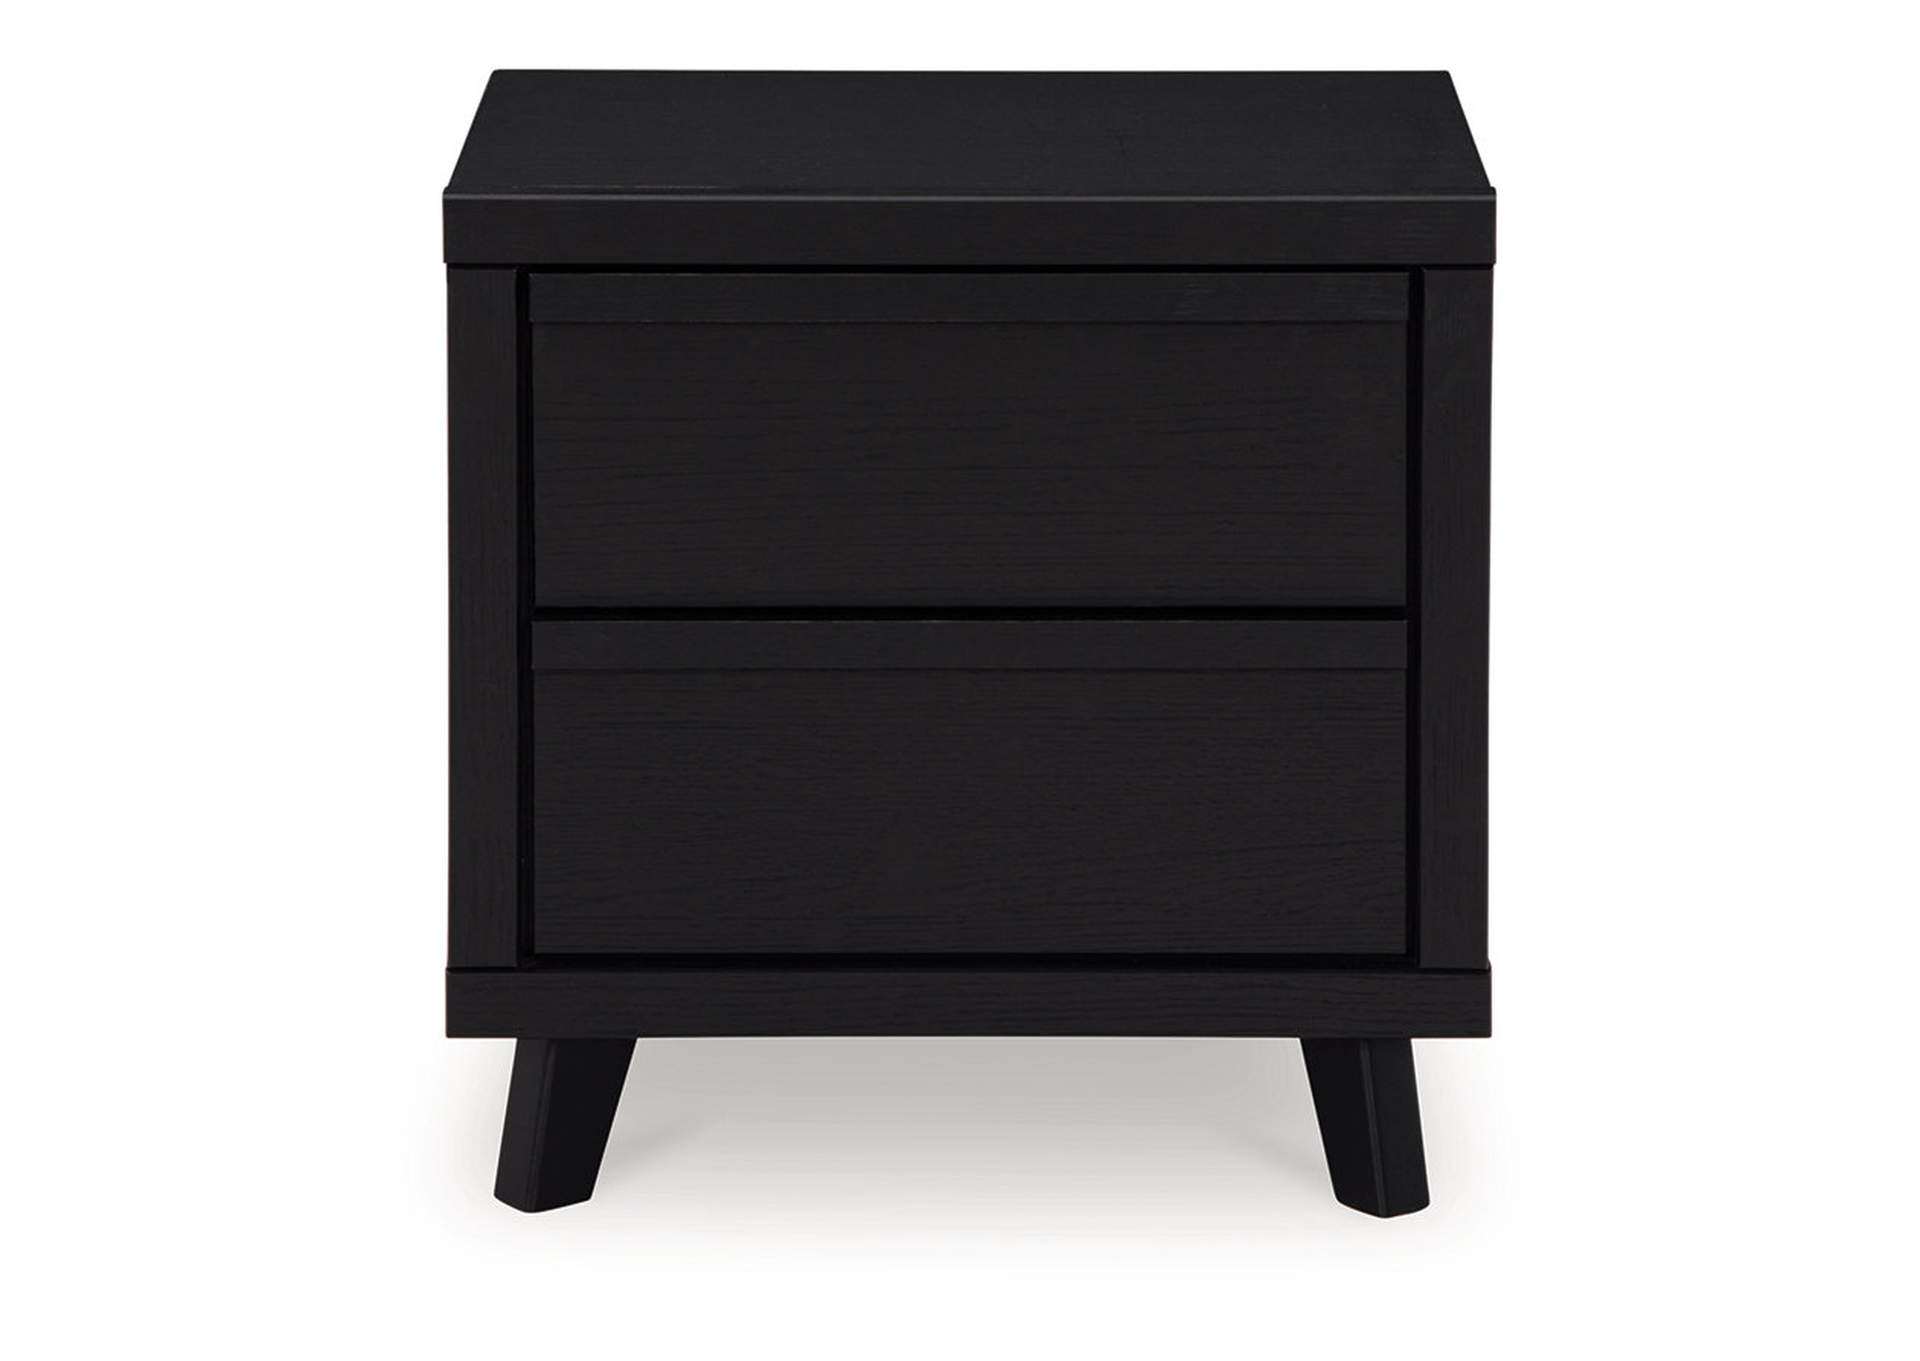 Danziar King Panel Bed, Dresser and 2 Nightstands,Signature Design By Ashley